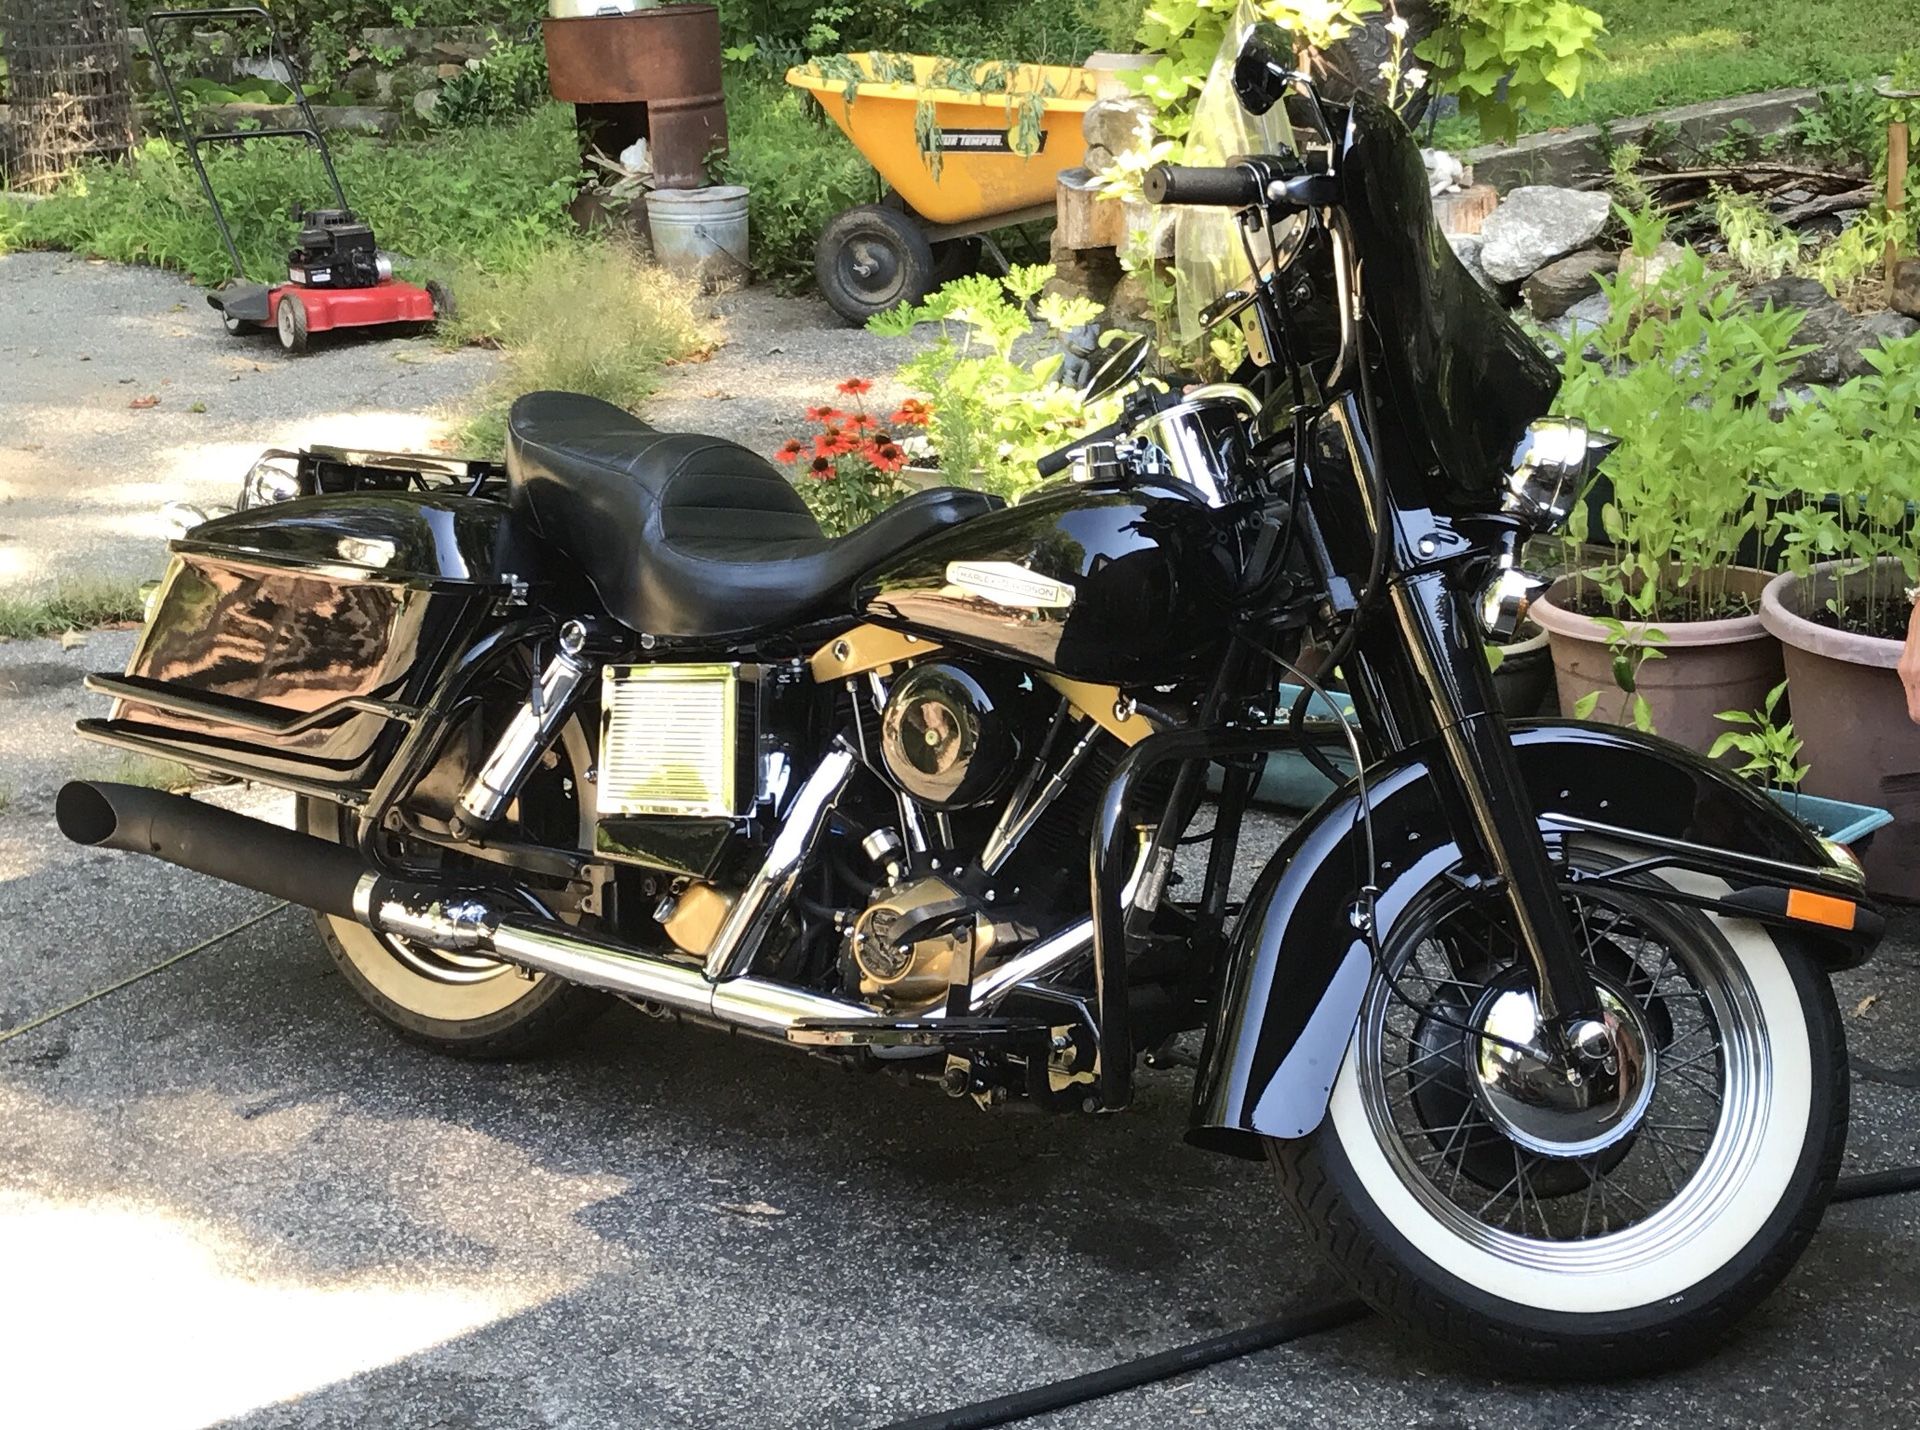 1984 Harley Davidson FLHX special edition, picture shown without tour pack tour pack now on motorcycle asking $5,500 or best offer Ken